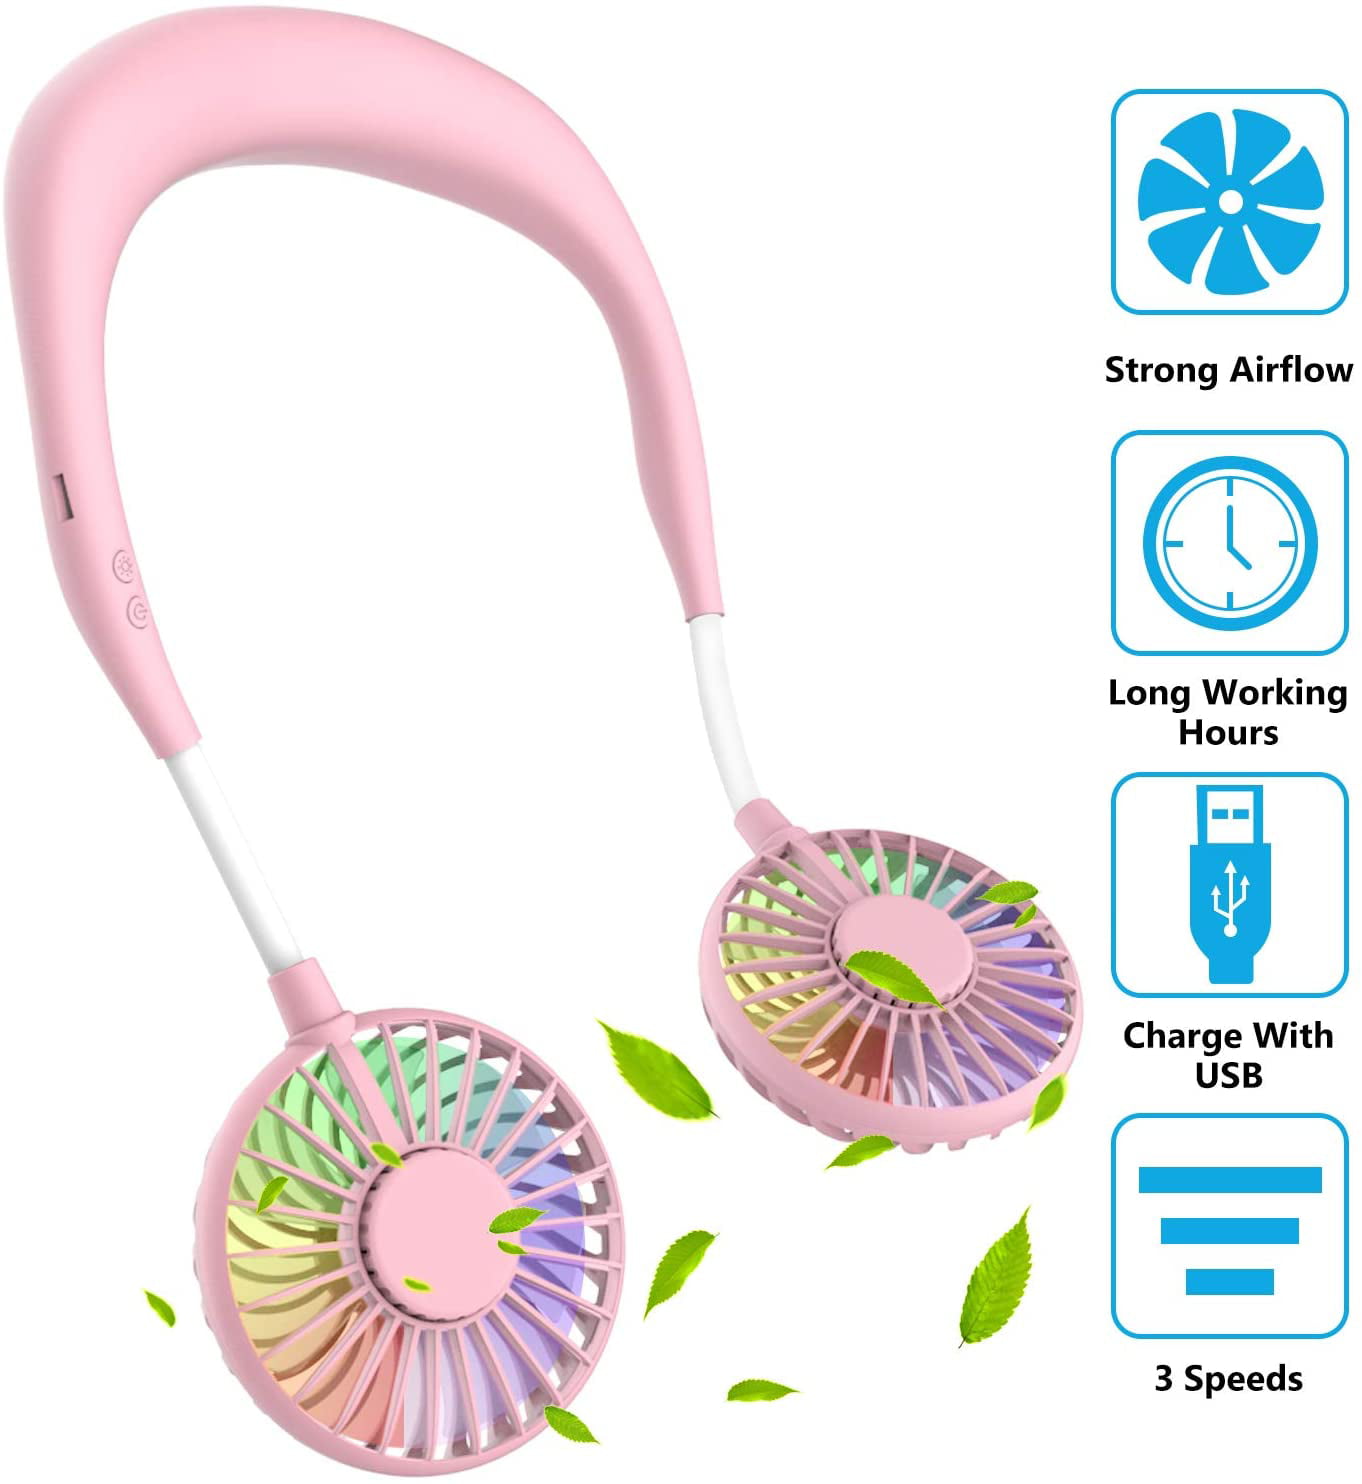 Rechargeable Perfect for Sports 3 Speeds Pink Quiet Portable Mini LED Fan Headphone Neck Hanging Design Fan Internal Rainbow and White Light Hand Free USB Personal Fan Traveling and Office 